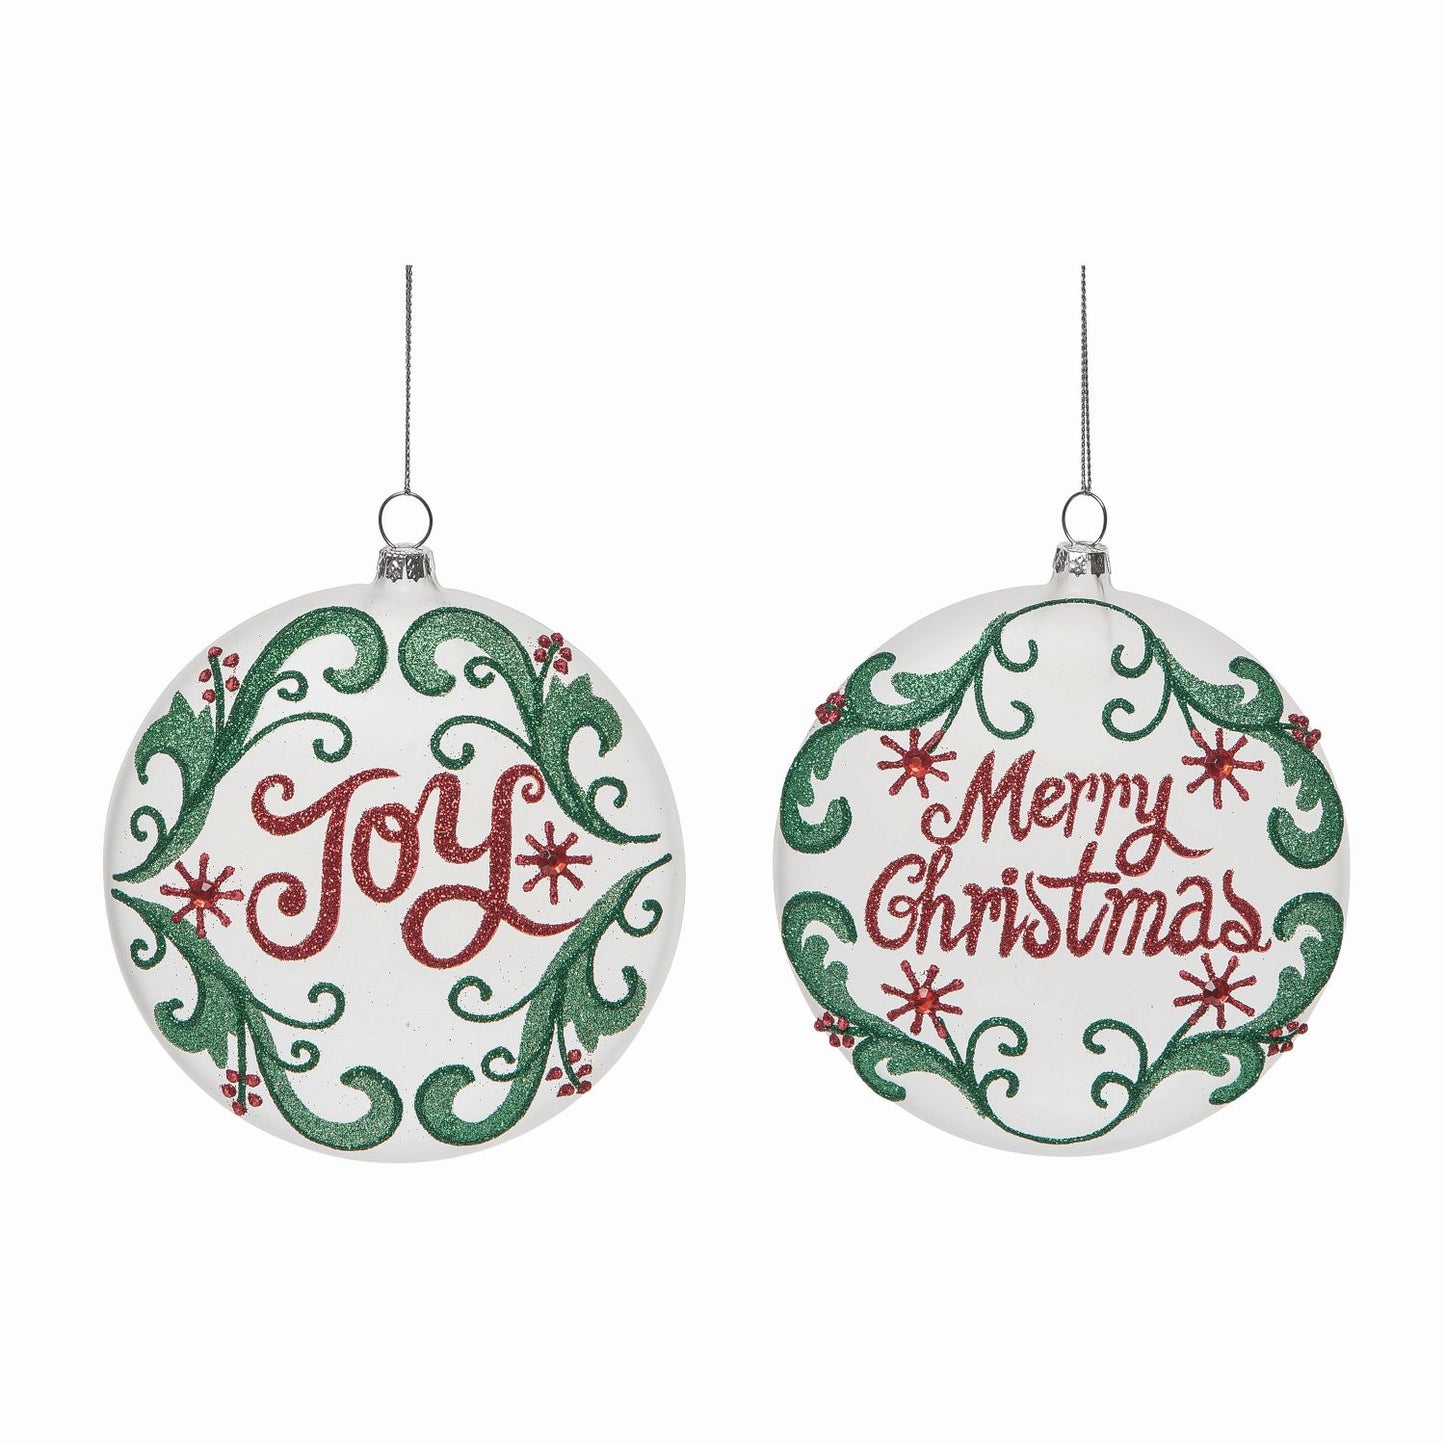 Transpac Glass Painted Vintage Holiday Ornament, Set Of 2, Assortment